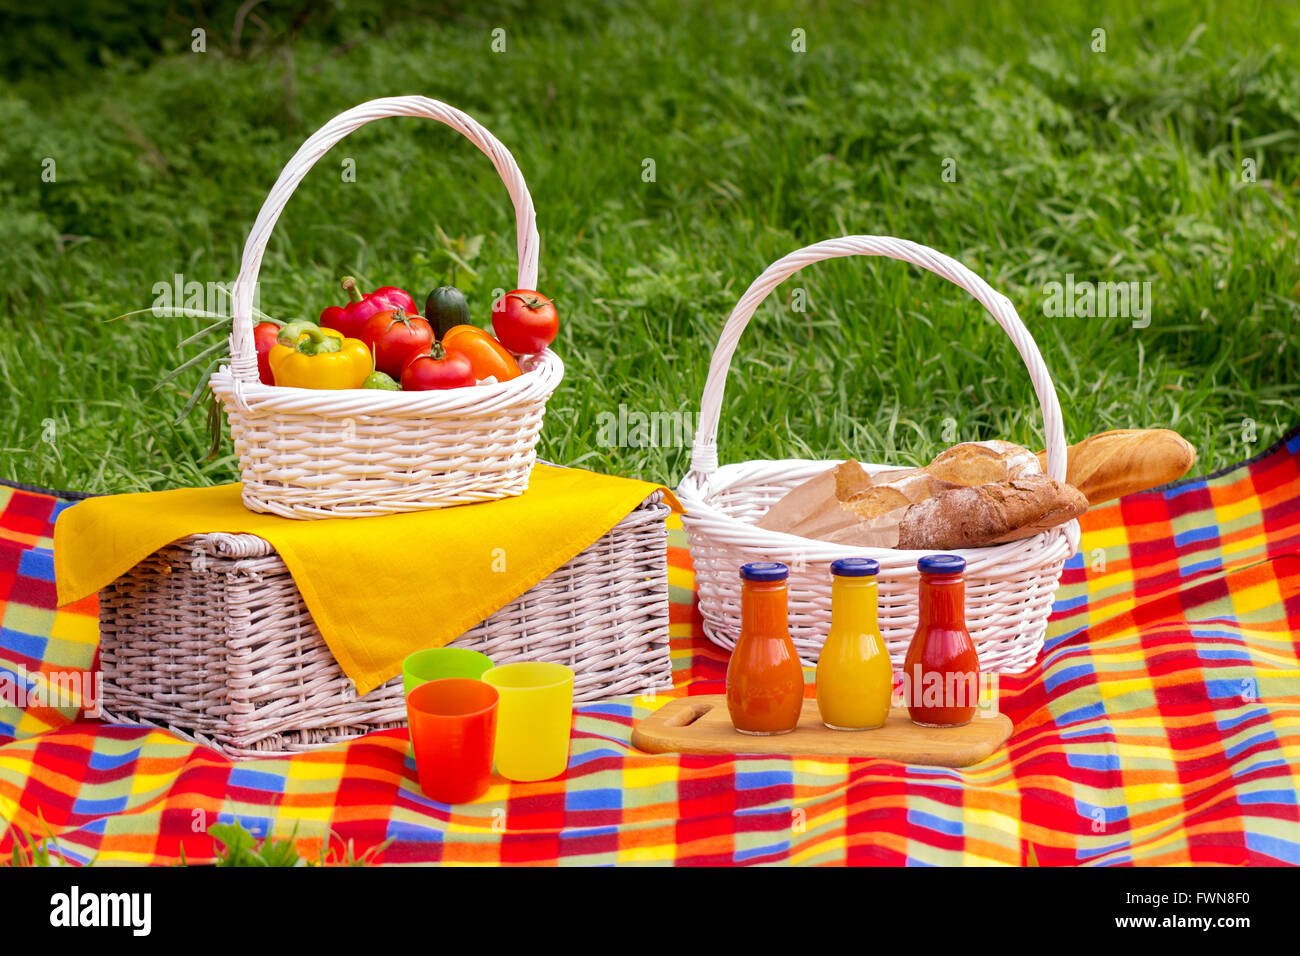 Picnic on the grass. Picnic basket with vegetables and bread. A bottles of juice. Stock Photo